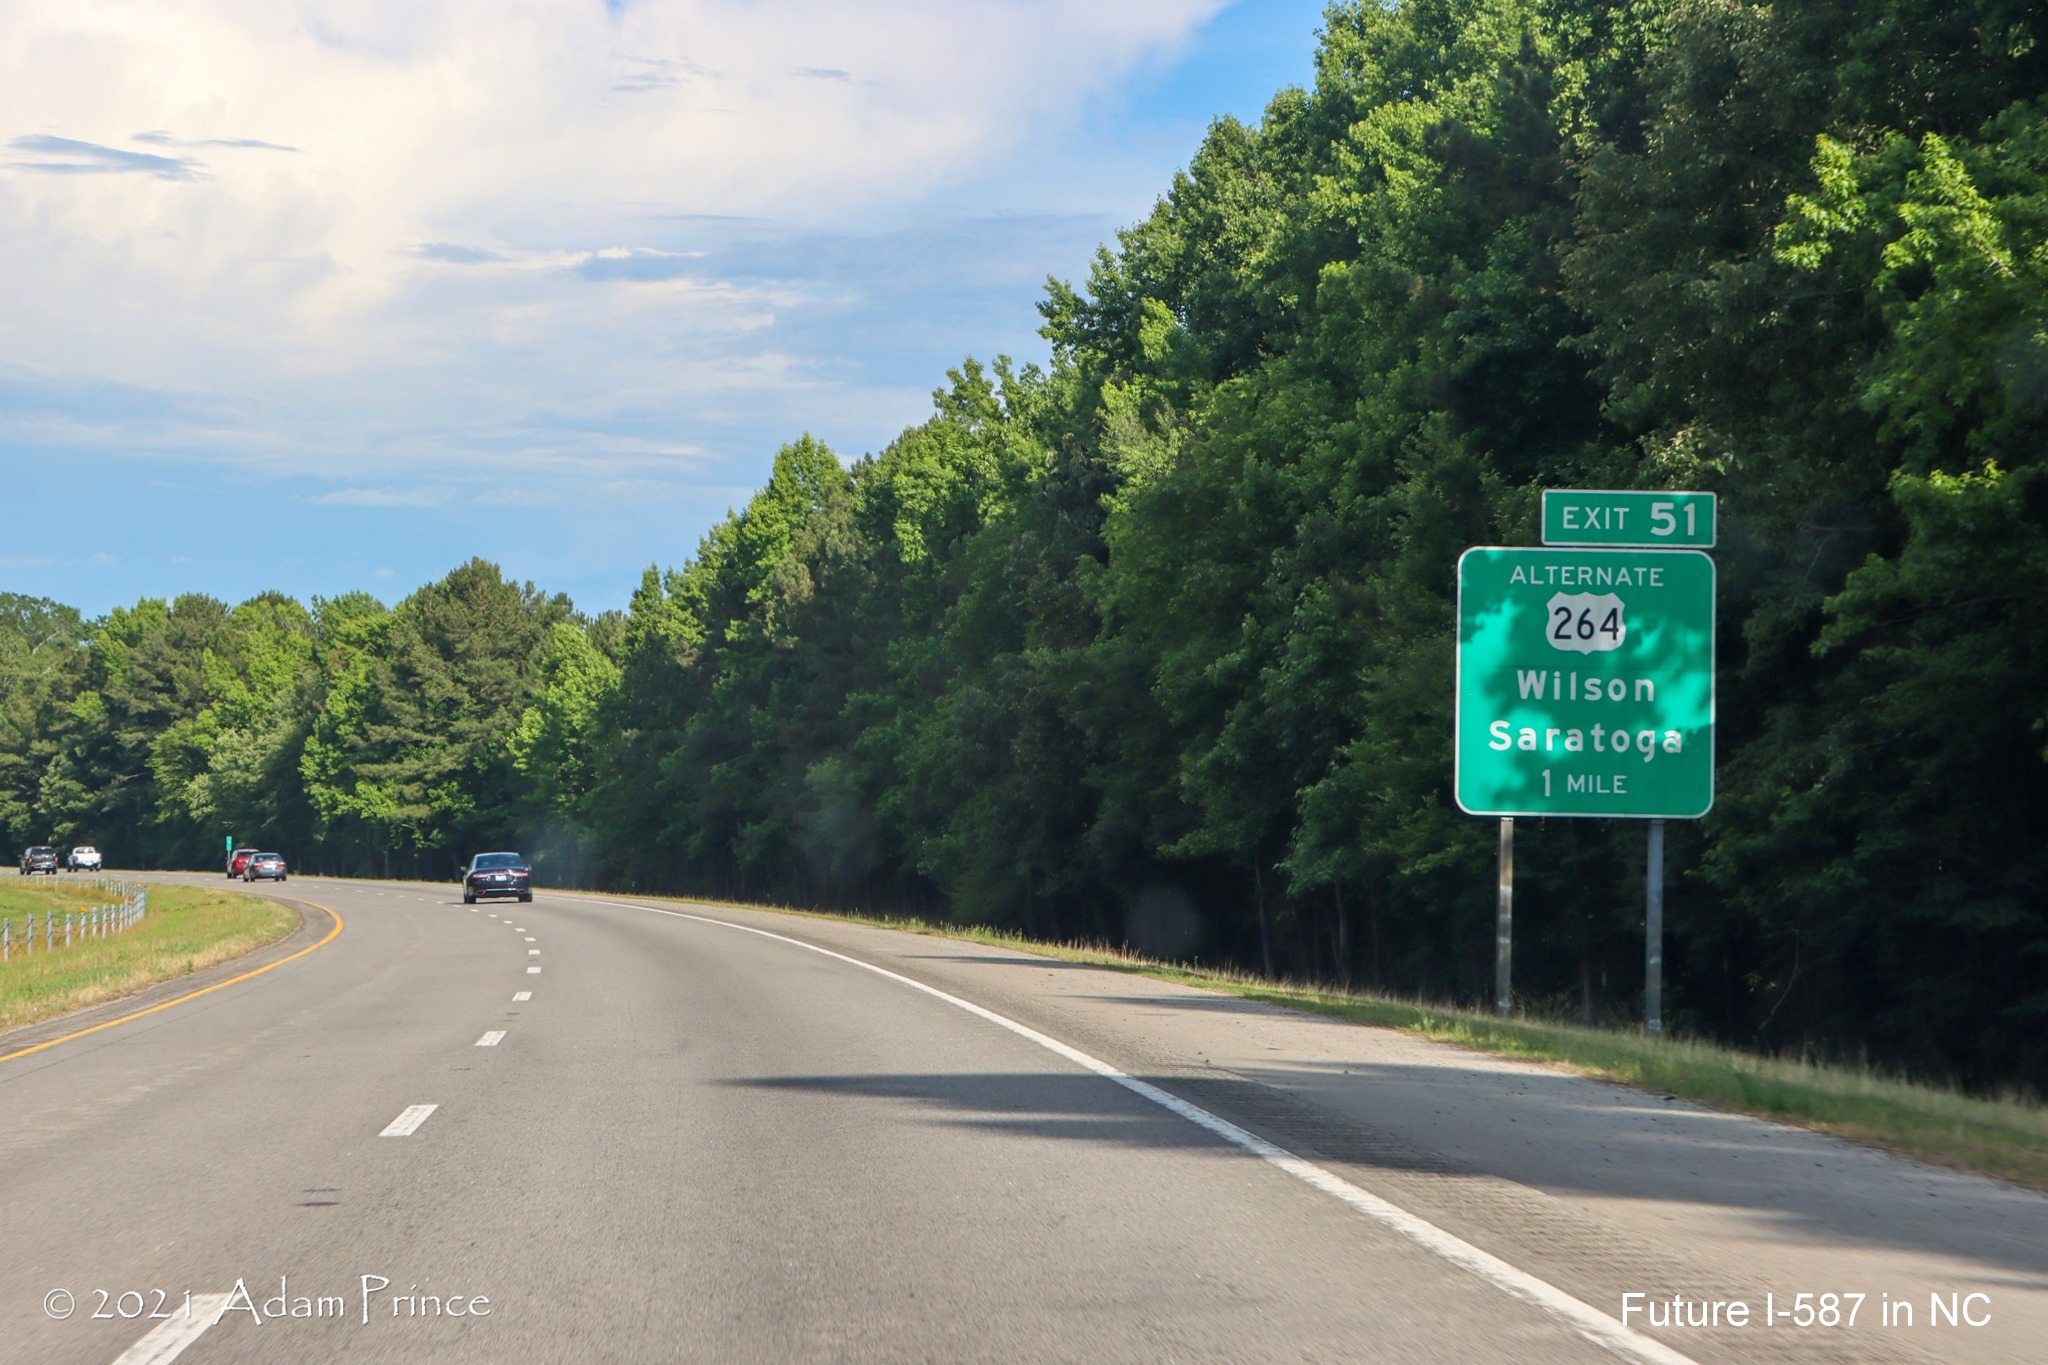 1 Mile advance sign for Alternate US 264 exit on US 264 East (Future I-587 South) in Greene County, photo by Adam Prince, June 2021